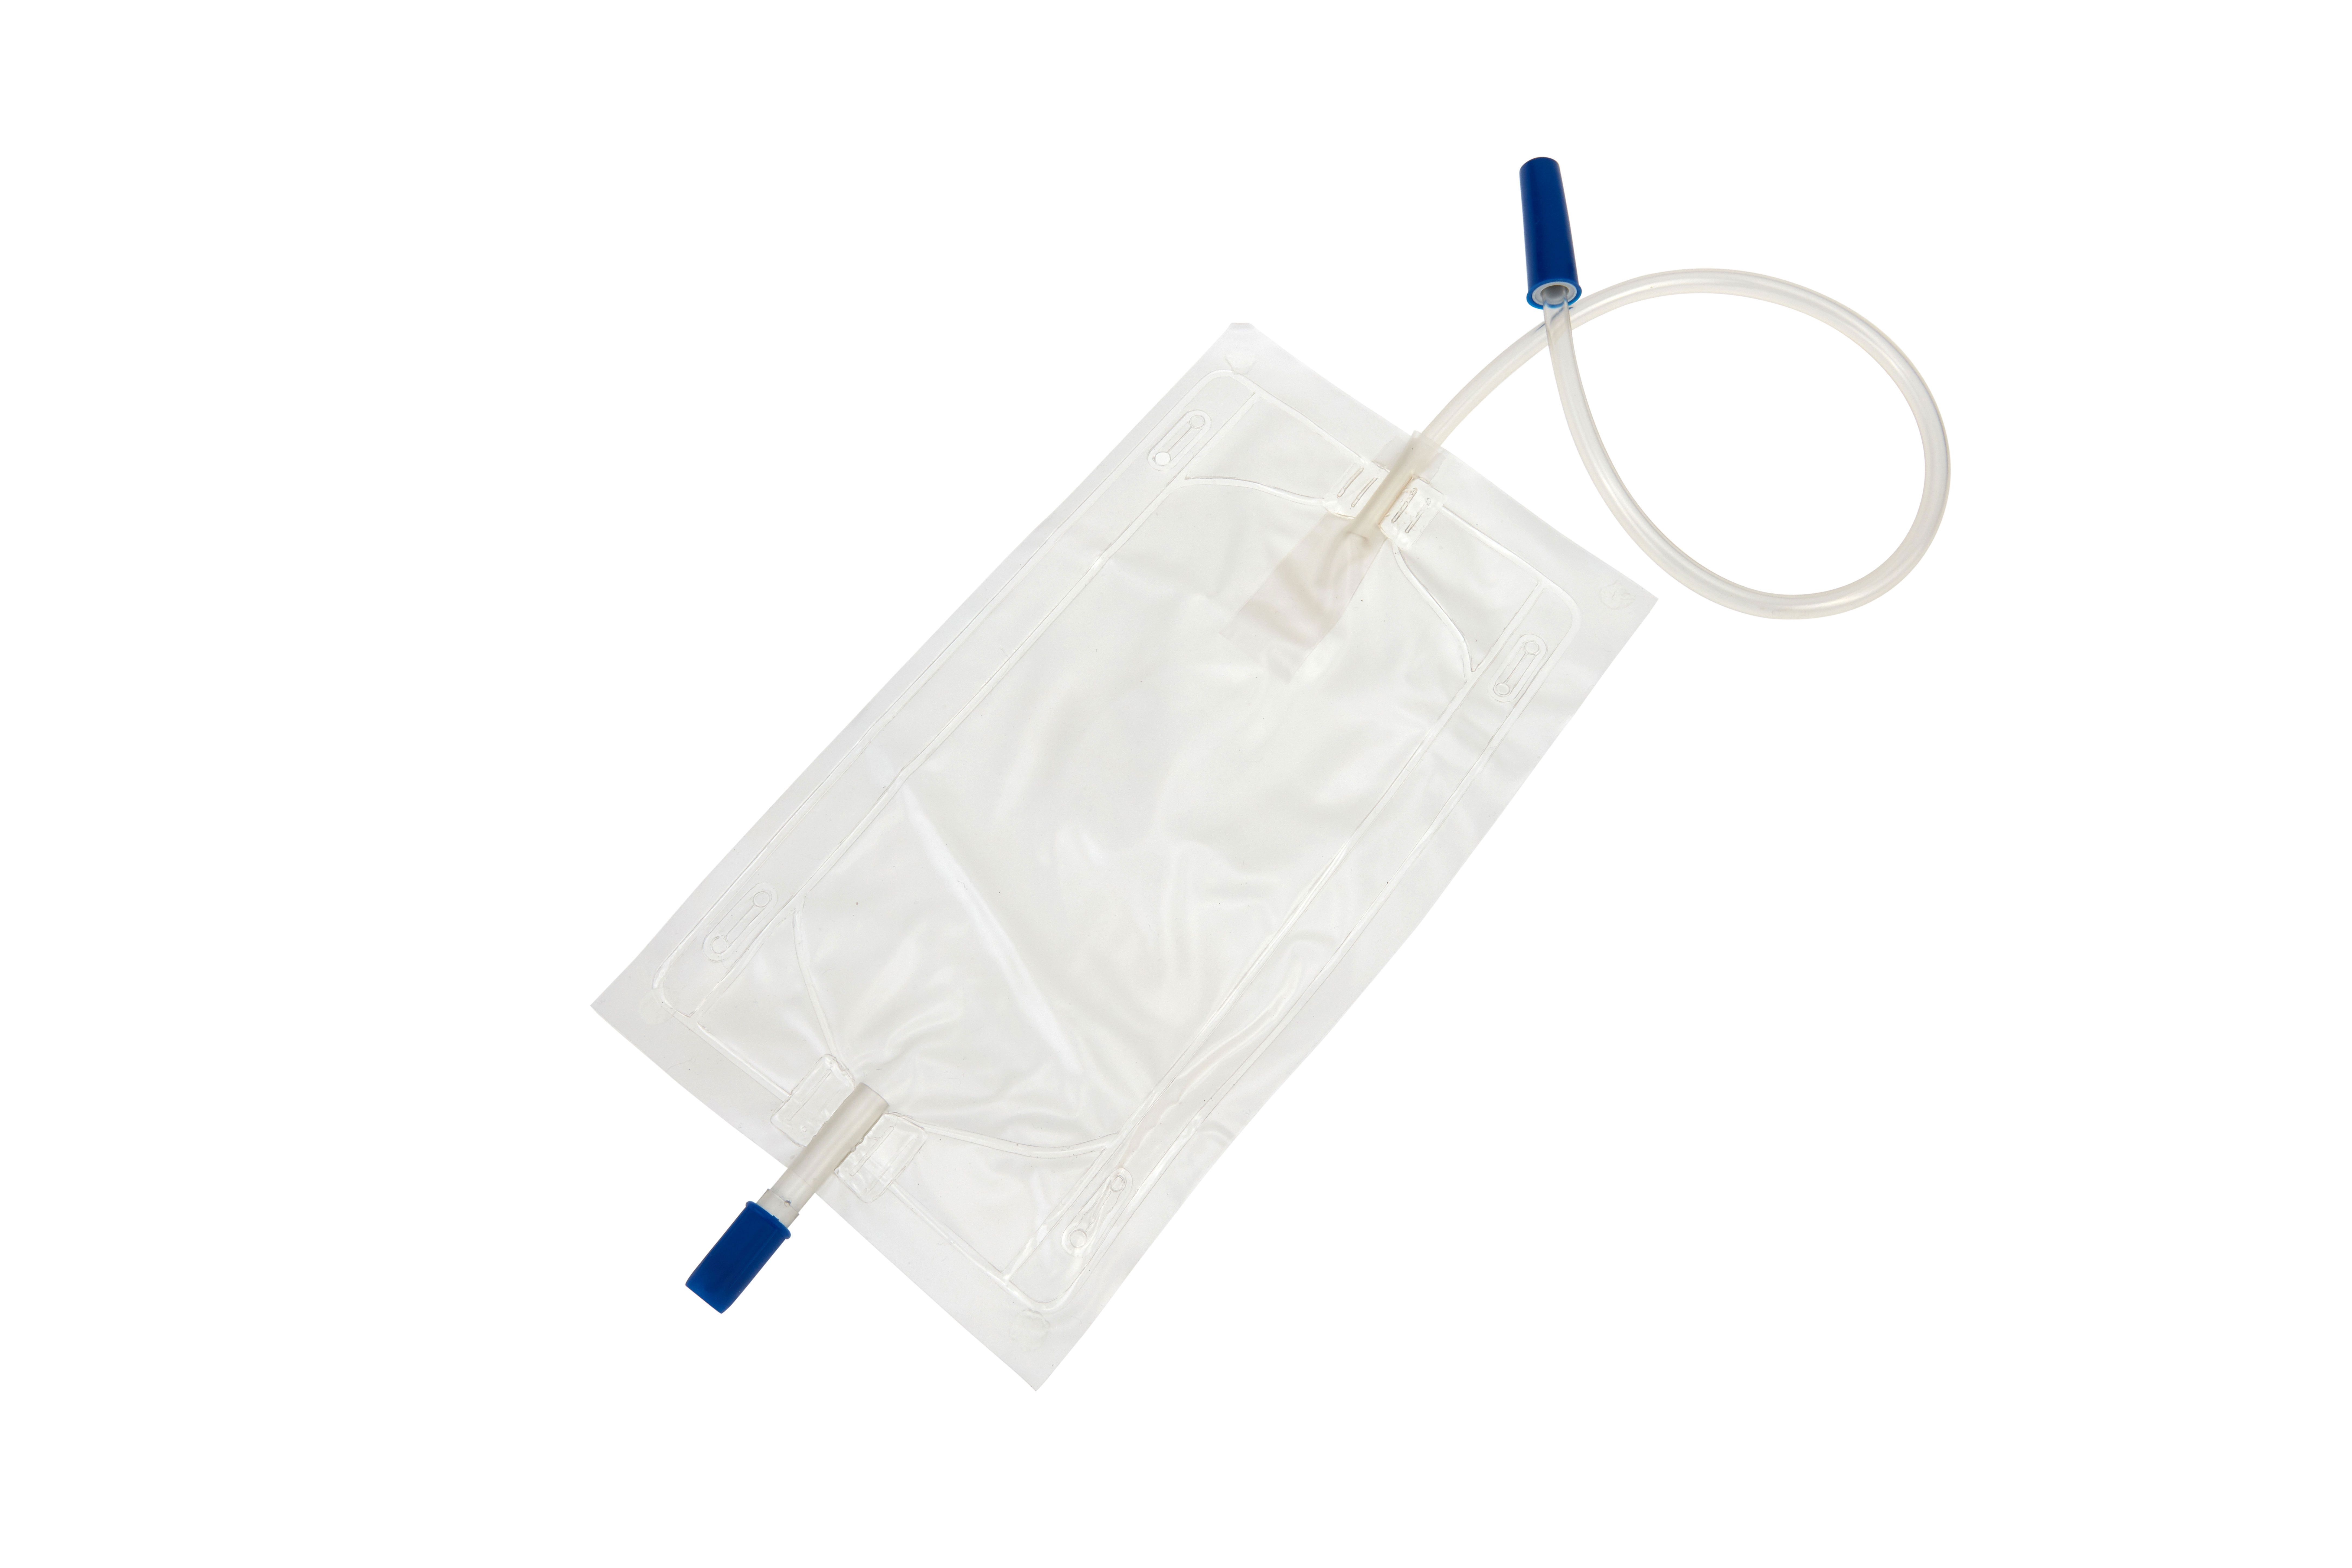 LB500MLNRV Romed urine leg bags, 500ml, with non return valve and bottom outlet, 45cm tube, sterile, per piece in polybag, per 250 pcs in a carton.